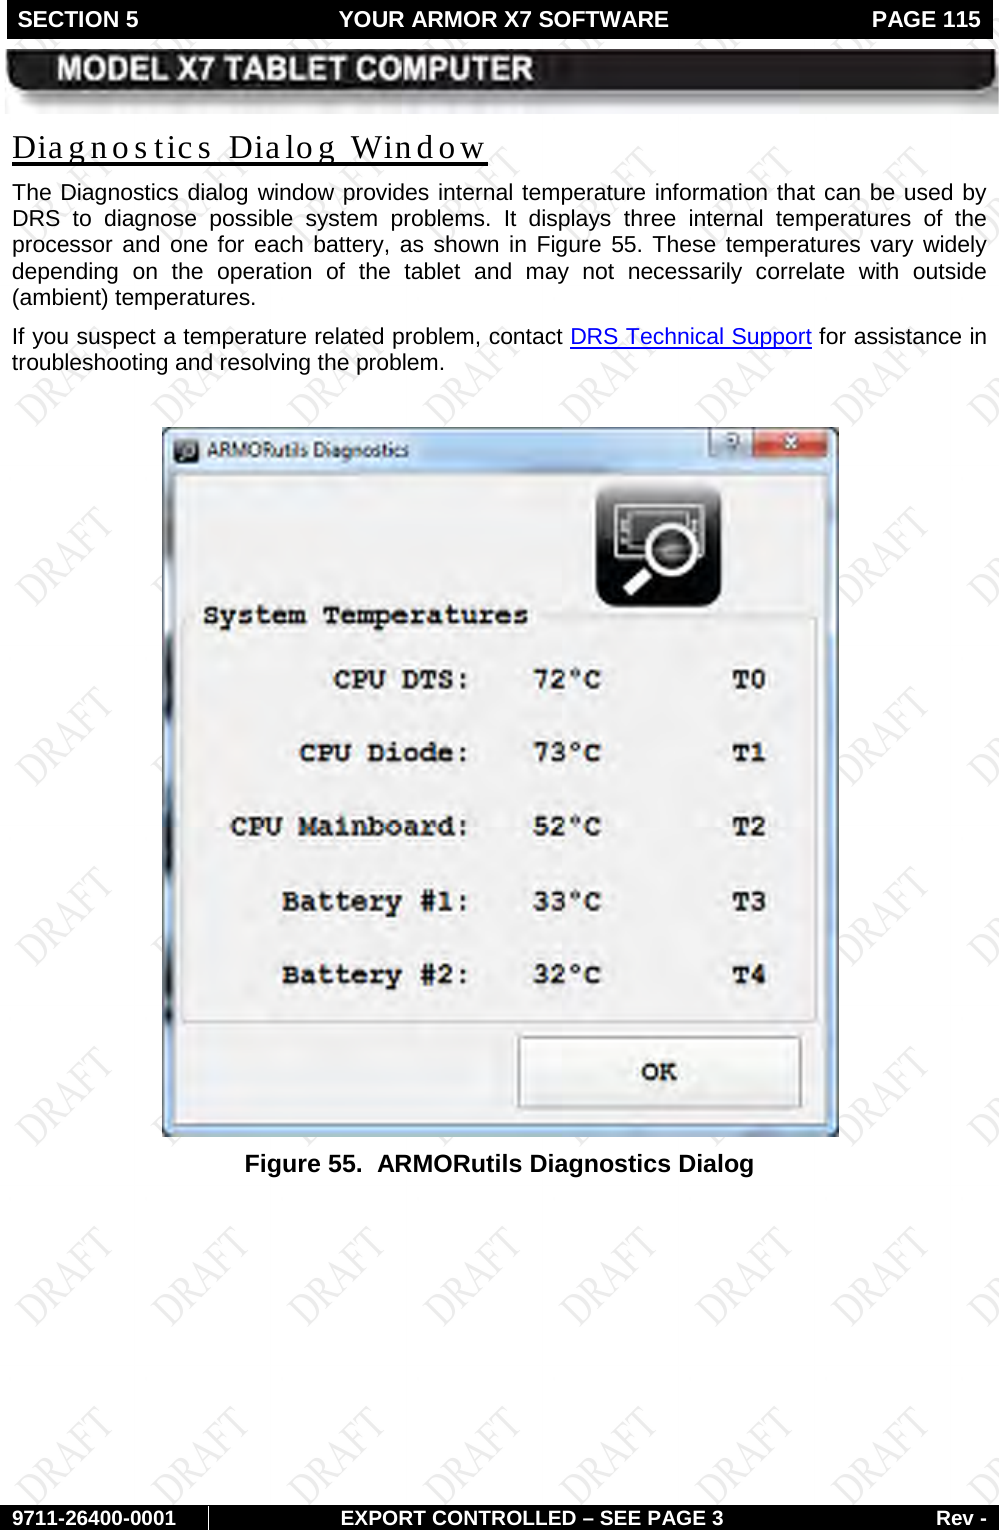 SECTION 5 YOUR ARMOR X7 SOFTWARE  PAGE 115        9711-26400-0001 EXPORT CONTROLLED – SEE PAGE 3 Rev - The Diagnostics dialog window provides internal temperature information that can be used by DRS to diagnose possible system problems. It displays  three  internal temperatures of the processor and one for each battery, as shown in Diagnos tics  Dialog Window Figure 55. These temperatures vary widely depending on the operation of the tablet and may not necessarily correlate with outside (ambient) temperatures.  If you suspect a temperature related problem, contact DRS Technical Support for assistance in troubleshooting and resolving the problem.    Figure 55.  ARMORutils Diagnostics Dialog    